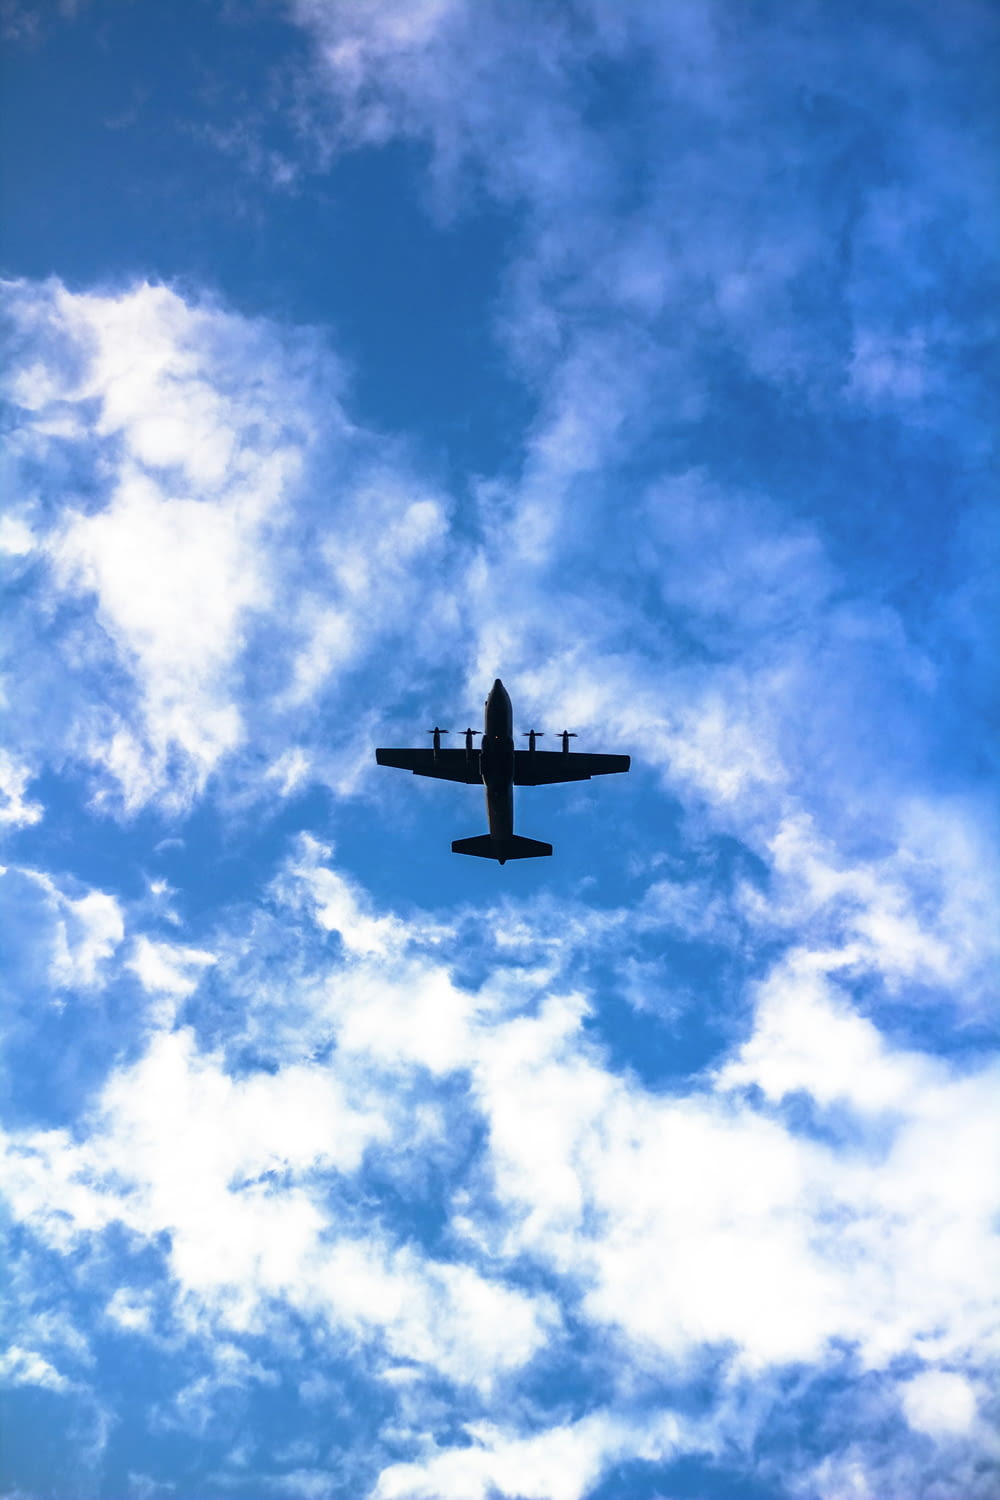 an airplane is flying through a cloudy blue sky